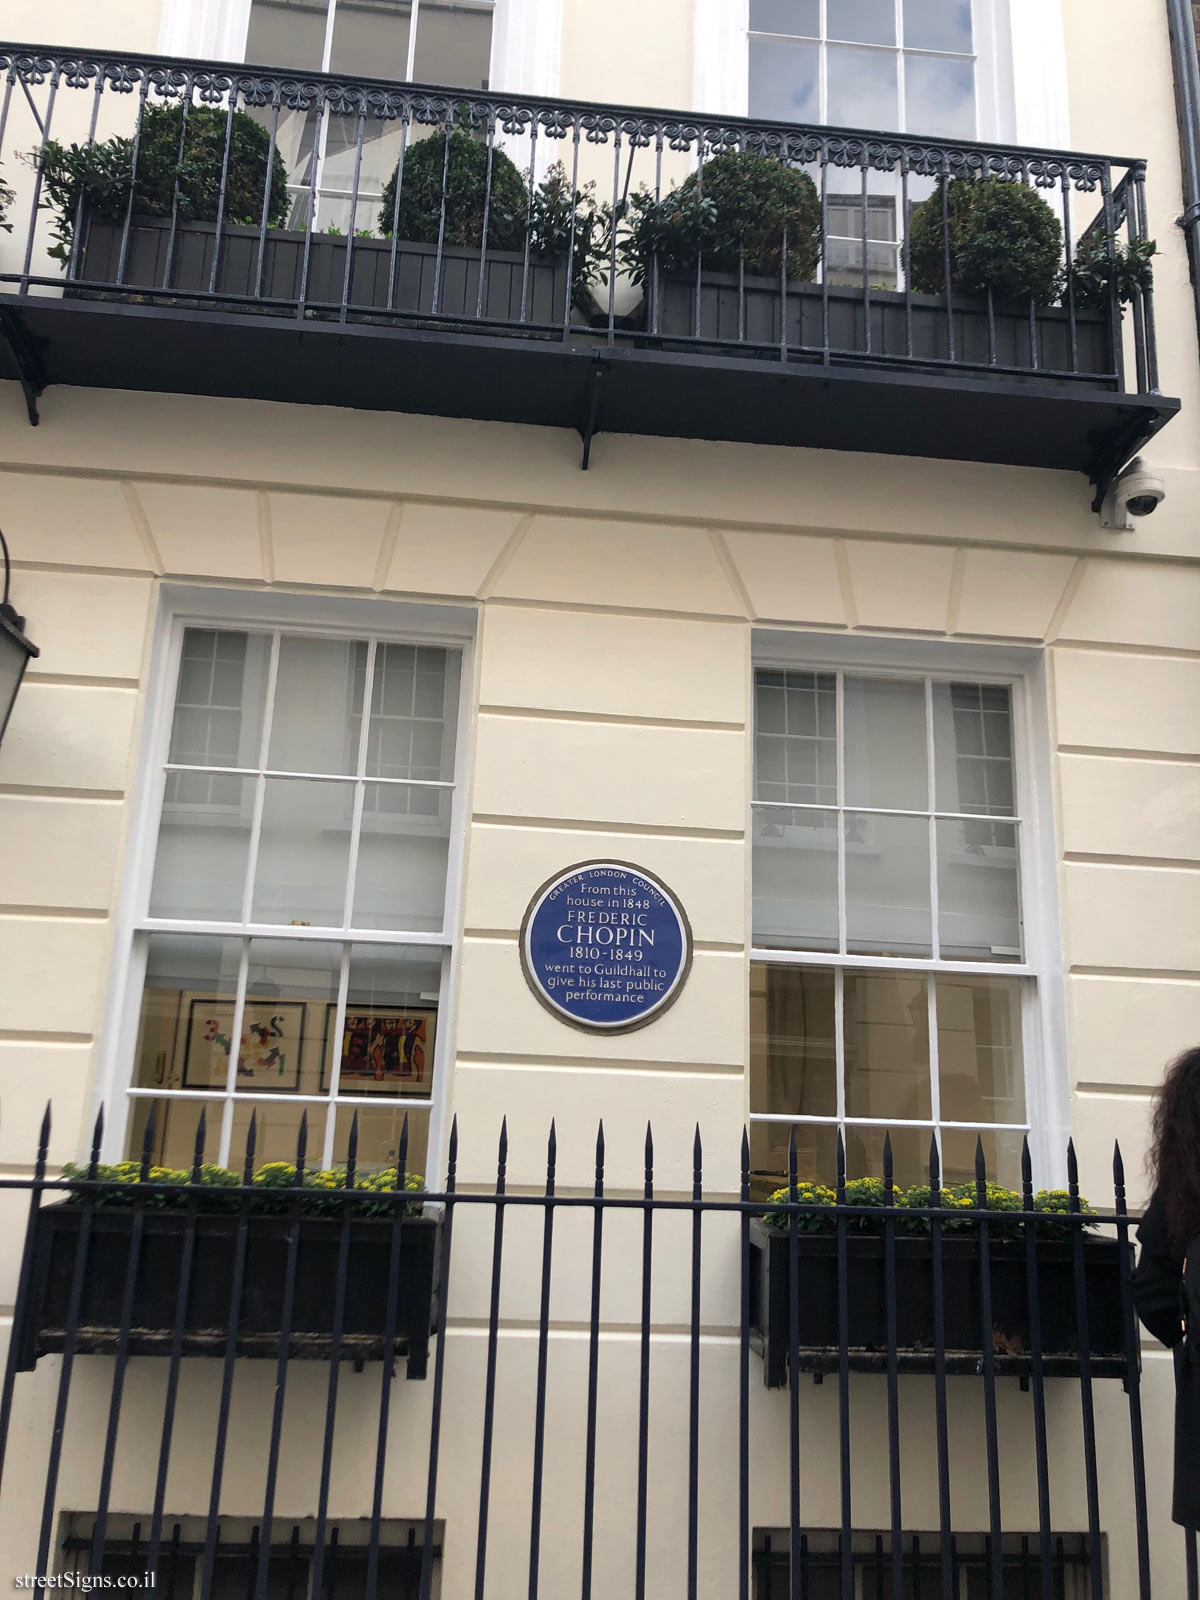 London -  A commemorative plaque on the house from which Chopin went to his last concert - 4 St James’s Pl, St. James’s, London SW1A 1NP, UK